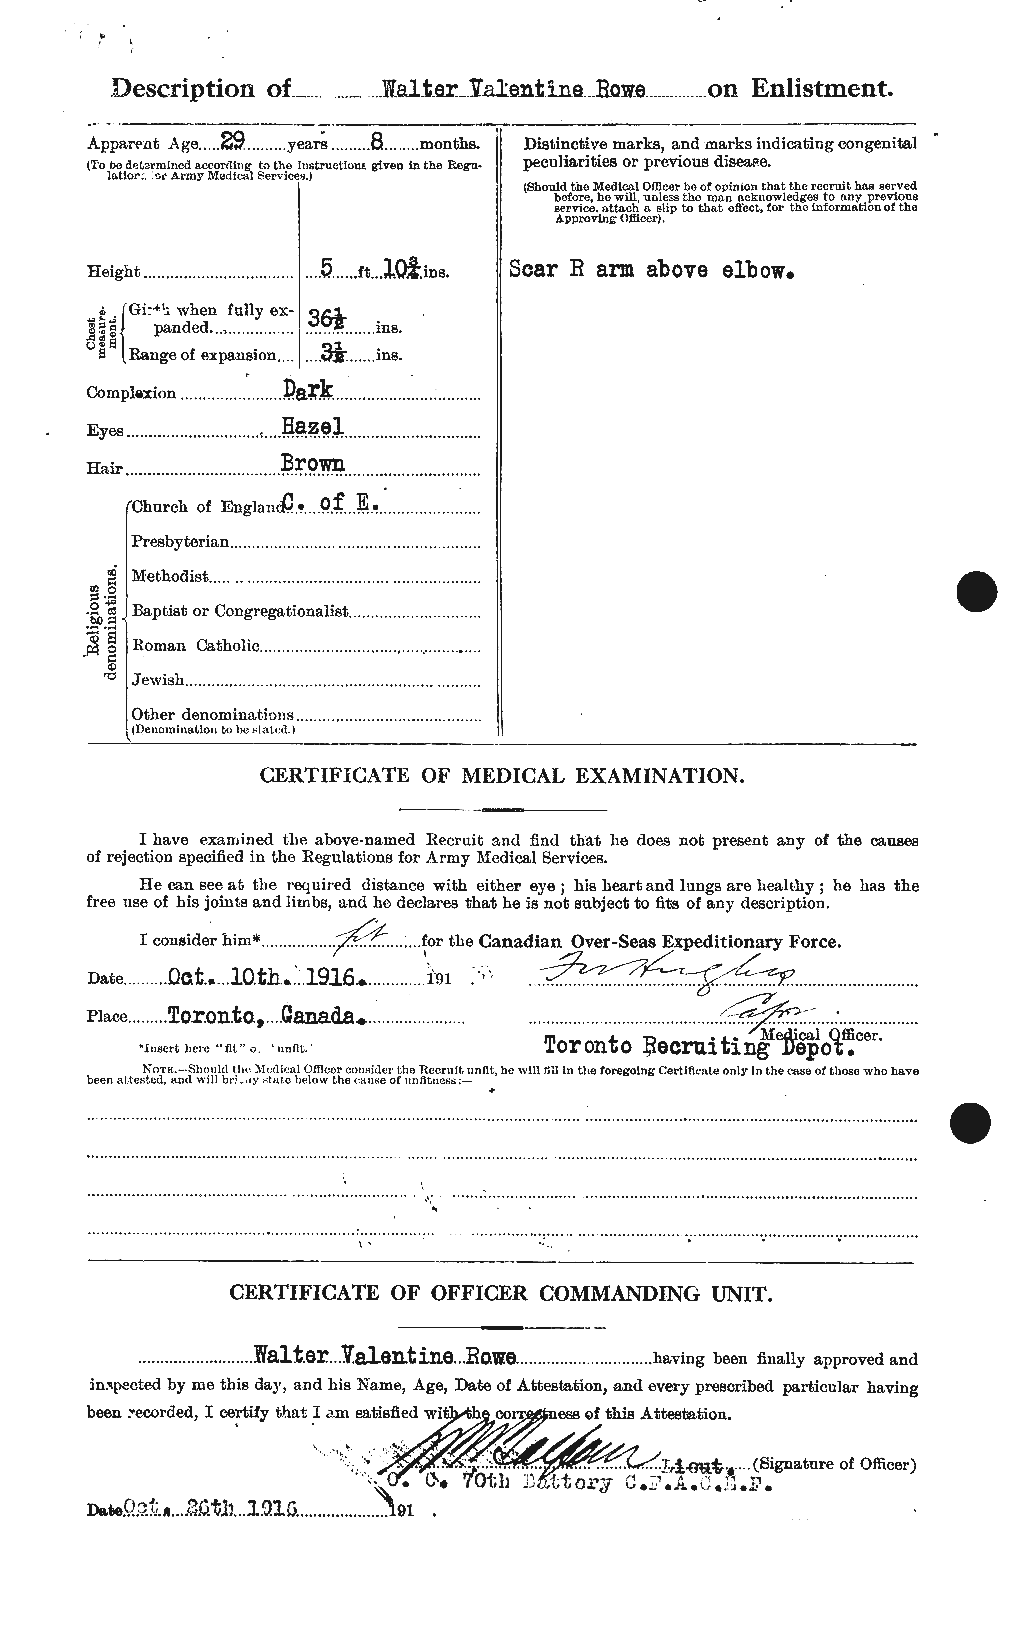 Personnel Records of the First World War - CEF 616012b